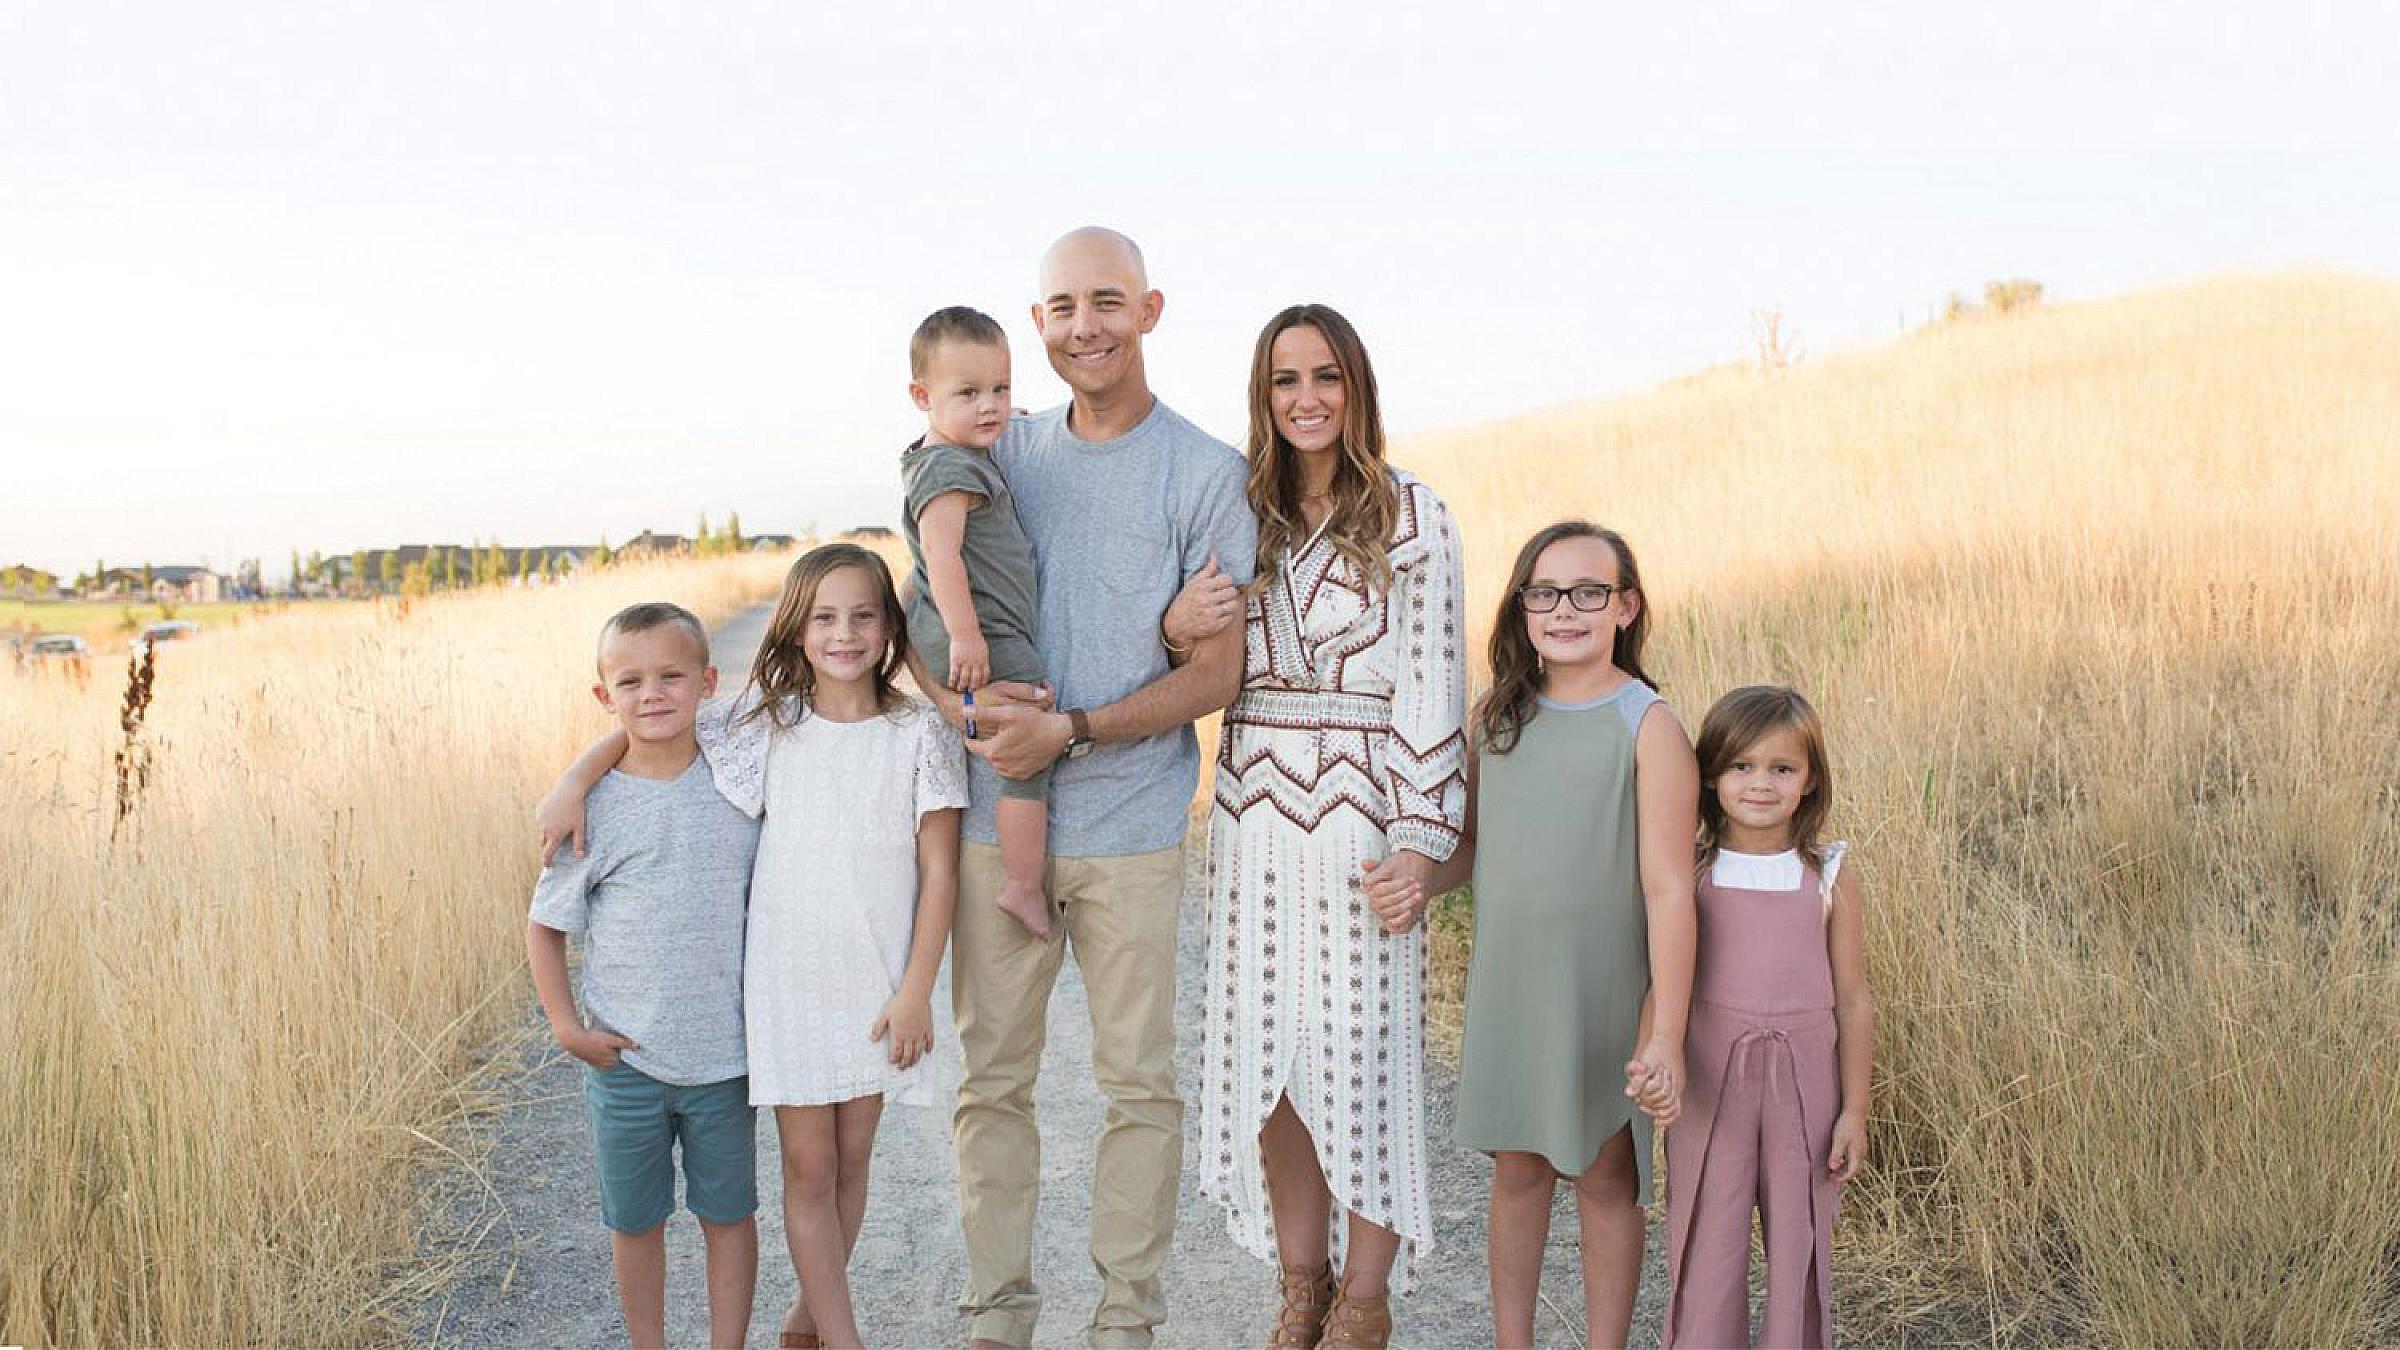 Jarem Hallows with wife and five children